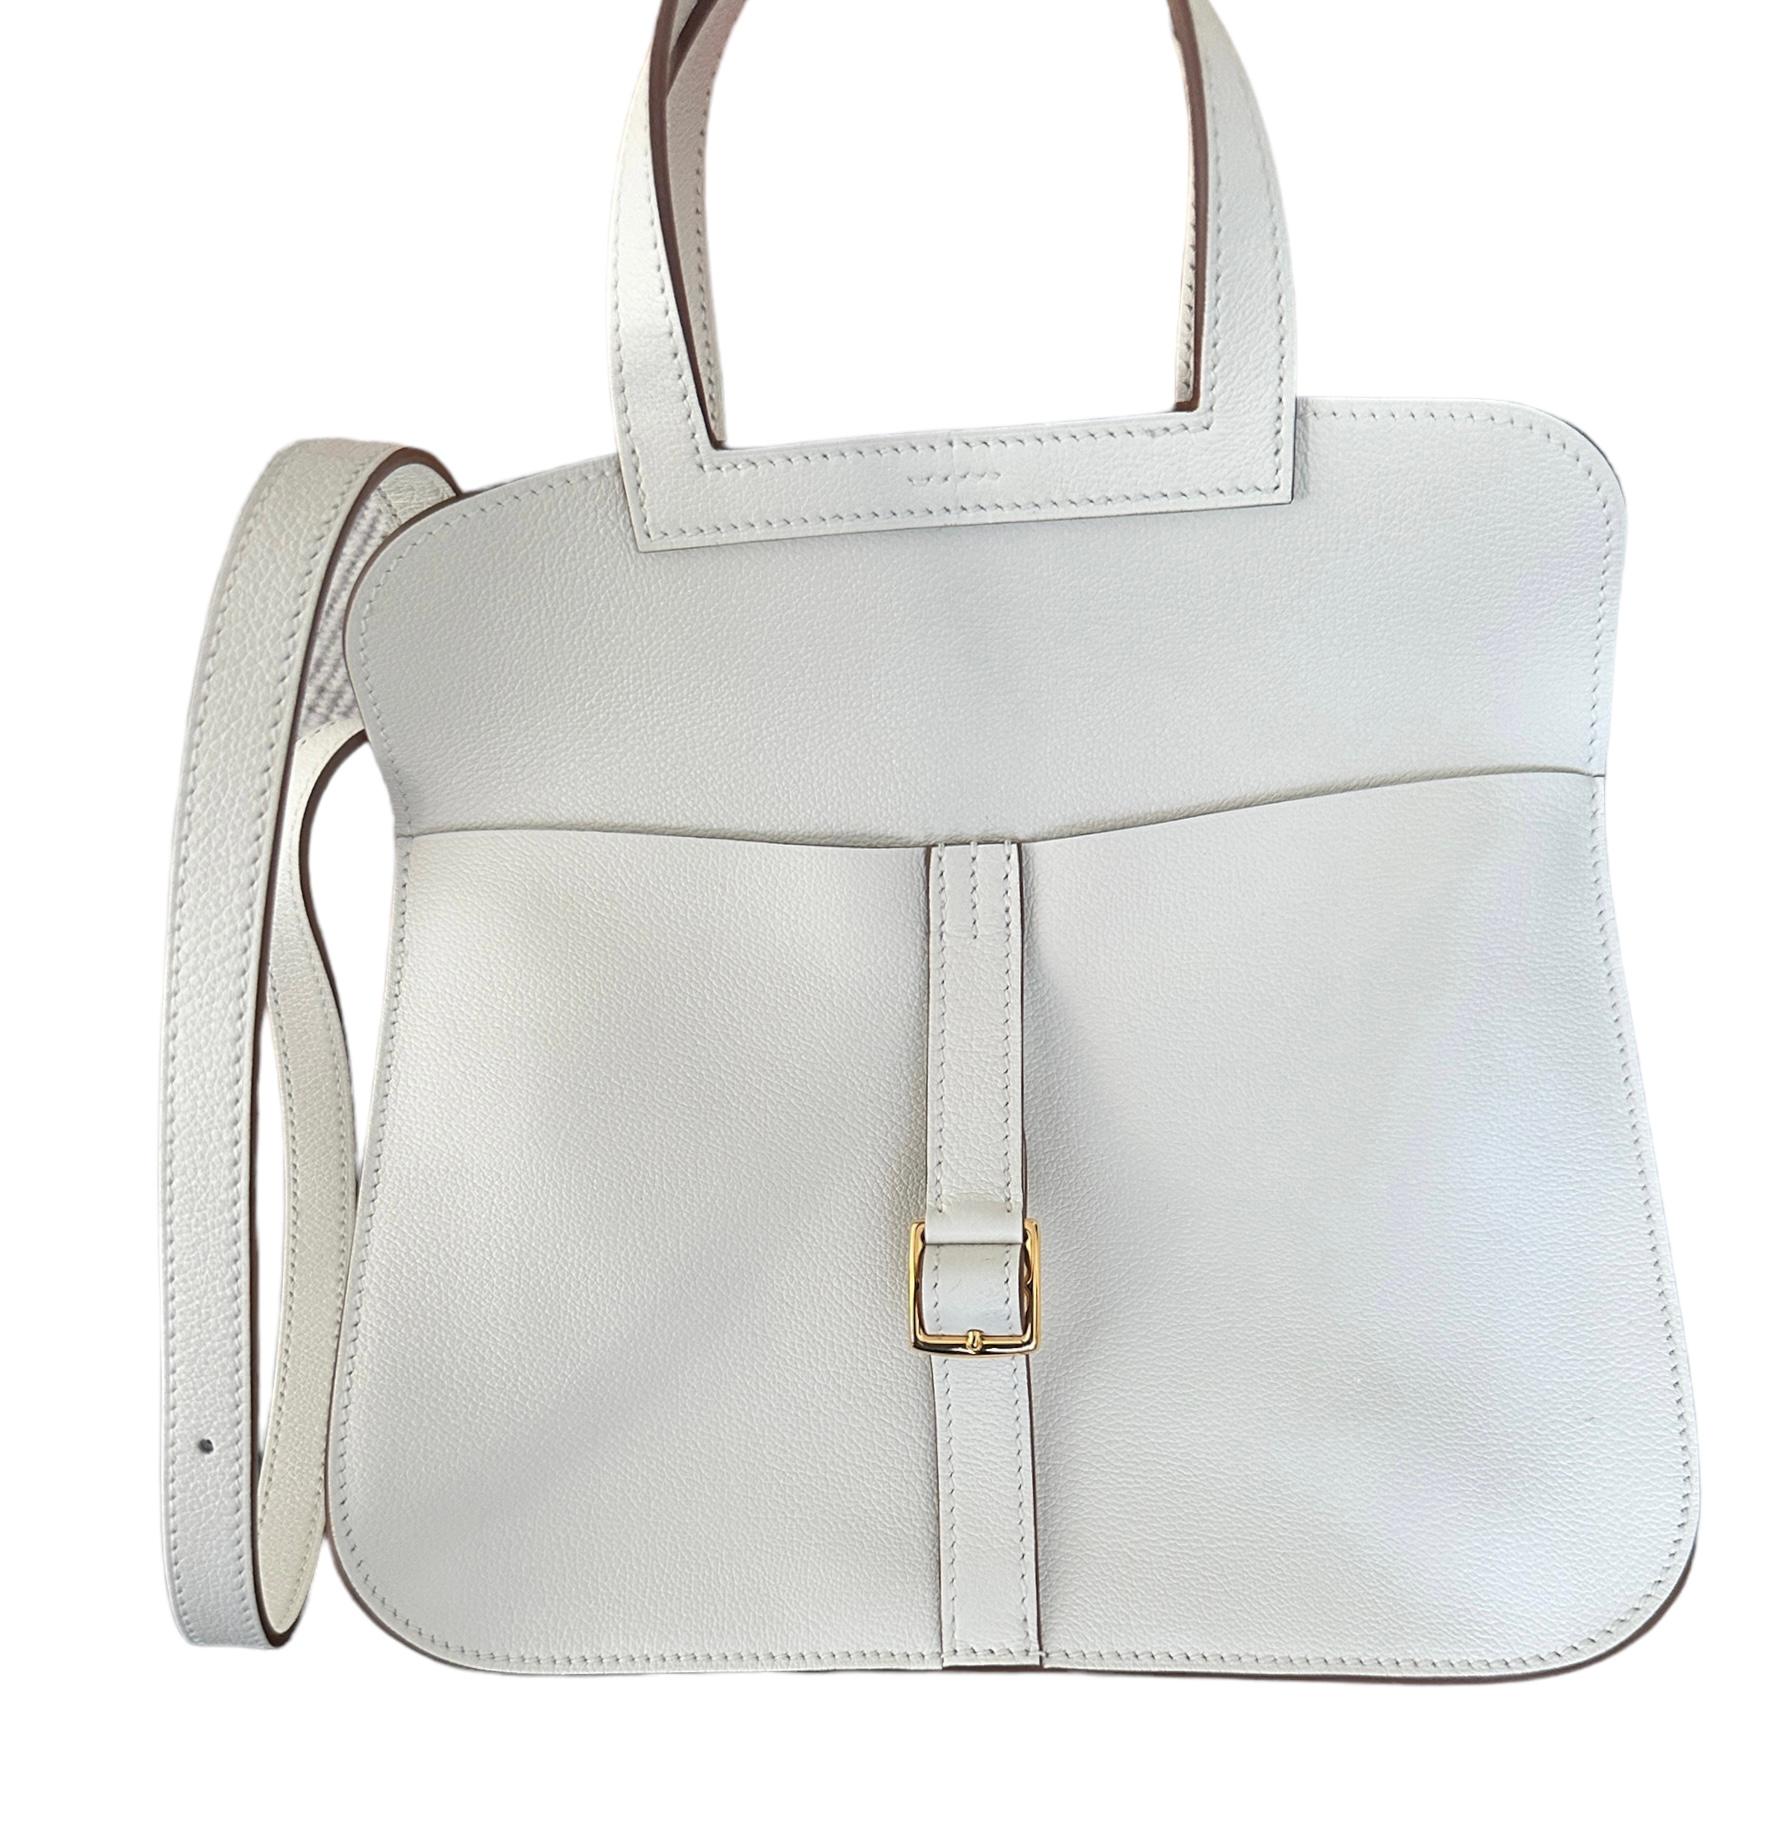 Hermes bag in Evercalf Leather
This is the new size 25cm
In our opinion, just the right size, not too big, not too small!
Nothing better than white with gold hardware
So chic and elegant
Dress up or down by adding a Twilly! Changes the whole look of